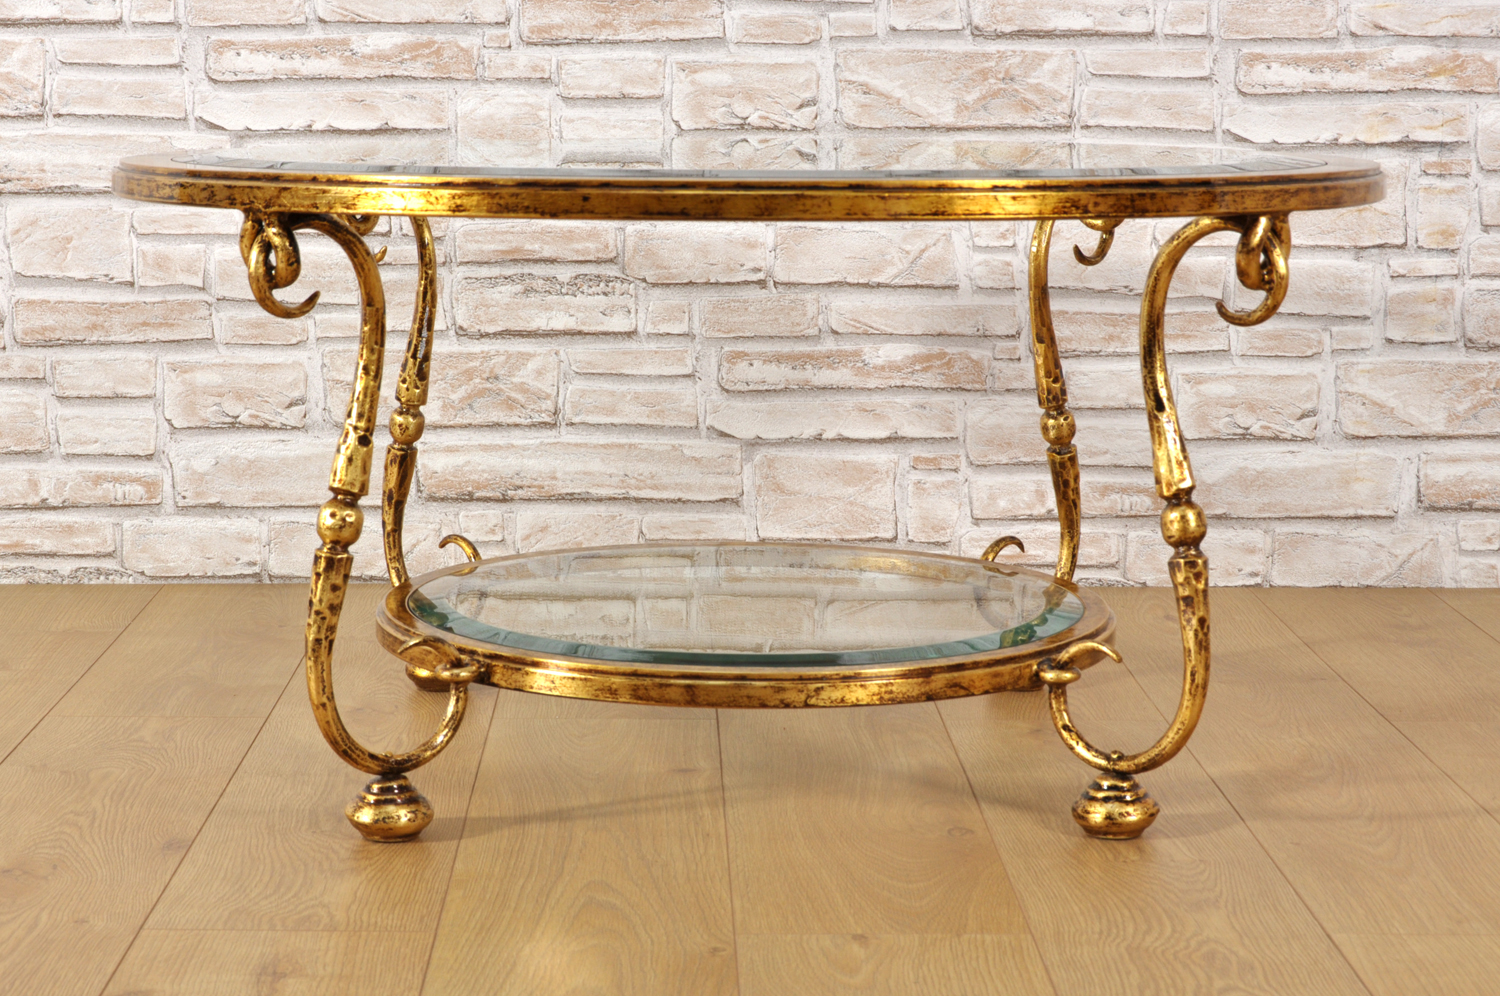 Round Golden Wrought Iron Living Room Table In Gold Leaf